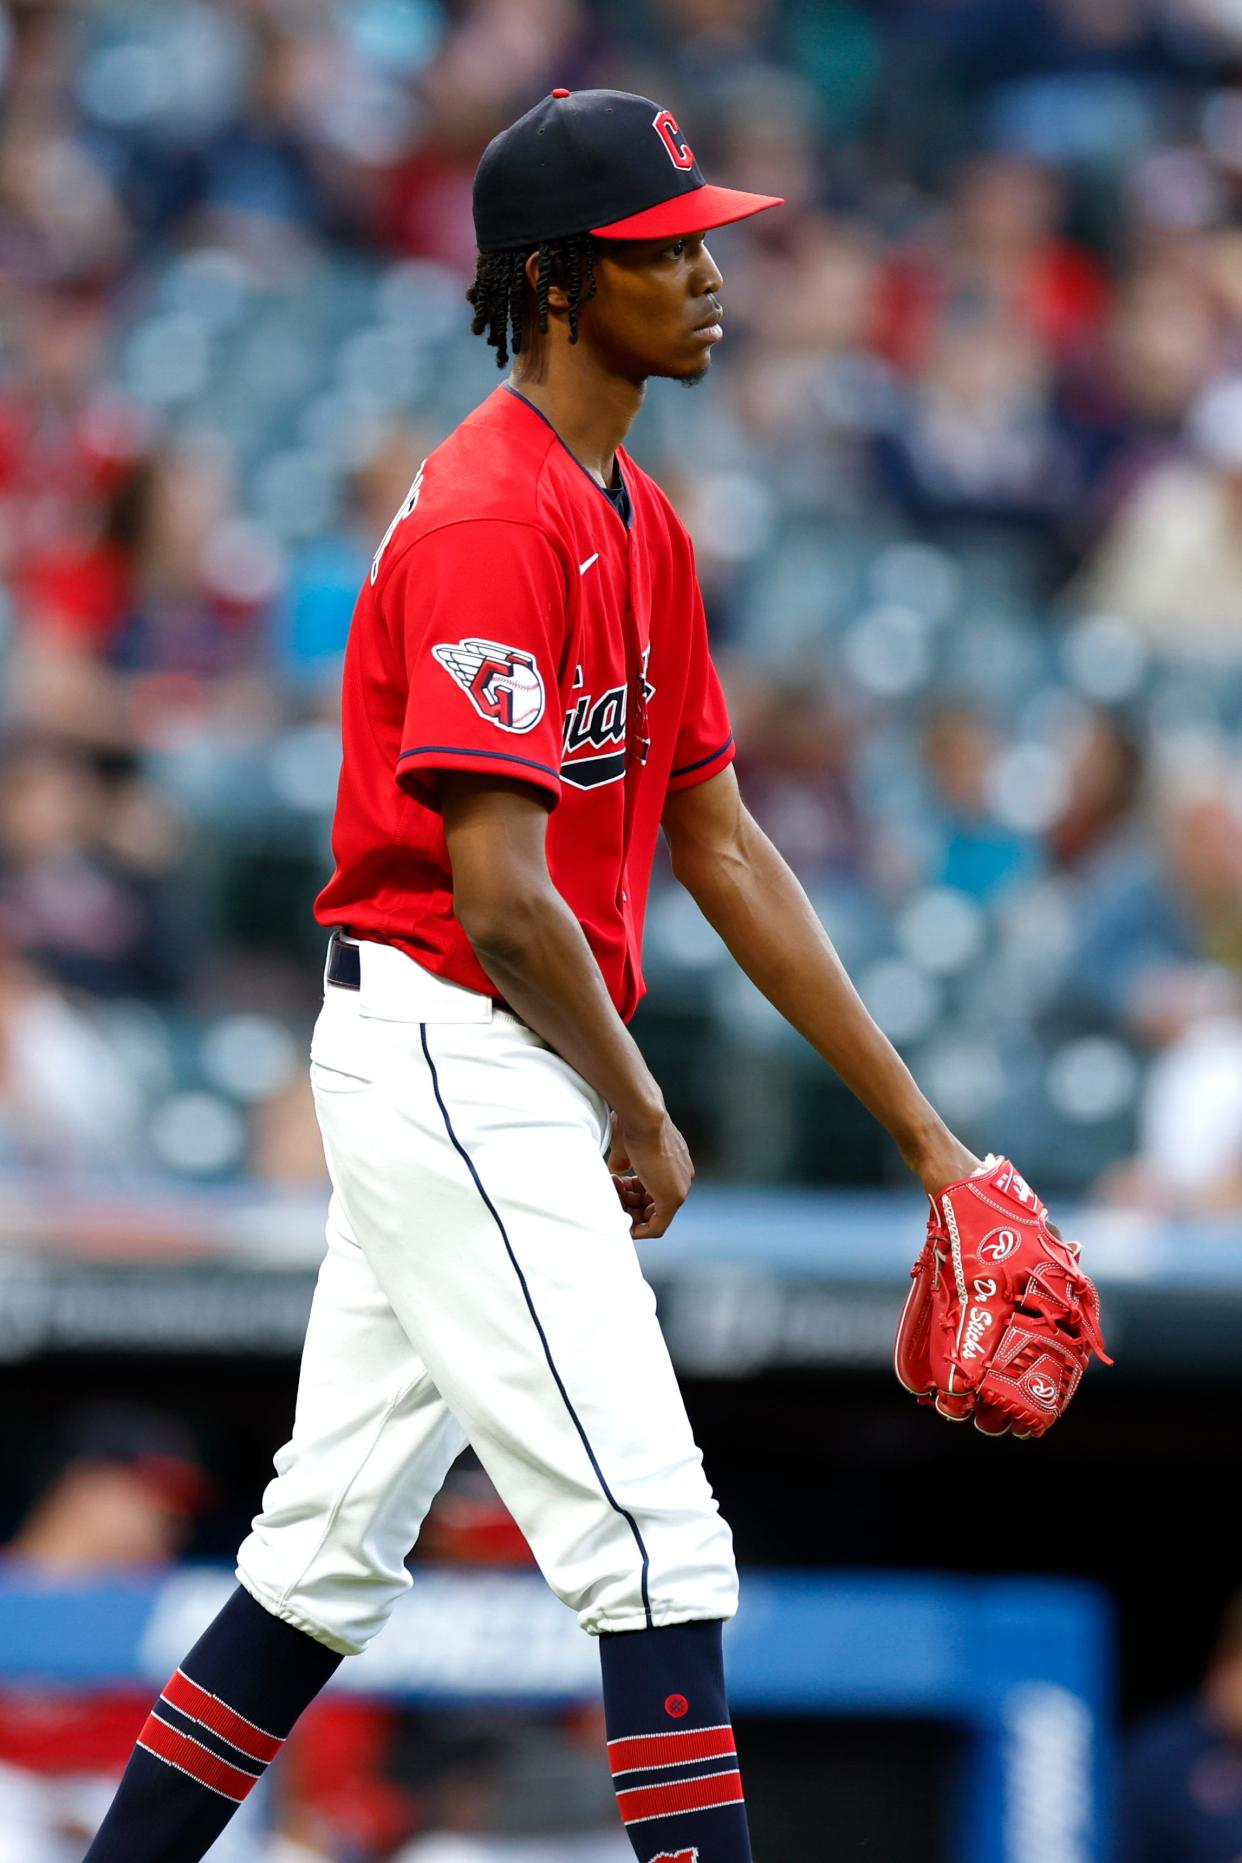 Cleveland Guardians starting pitcher Triston McKenzie walks back to the mound after giving up a two-run home run to Minnesota Twins' Nick Gordon during the sixth inning of a baseball game Monday, June 27, 2022, in Cleveland. (AP Photo/Ron Schwane)